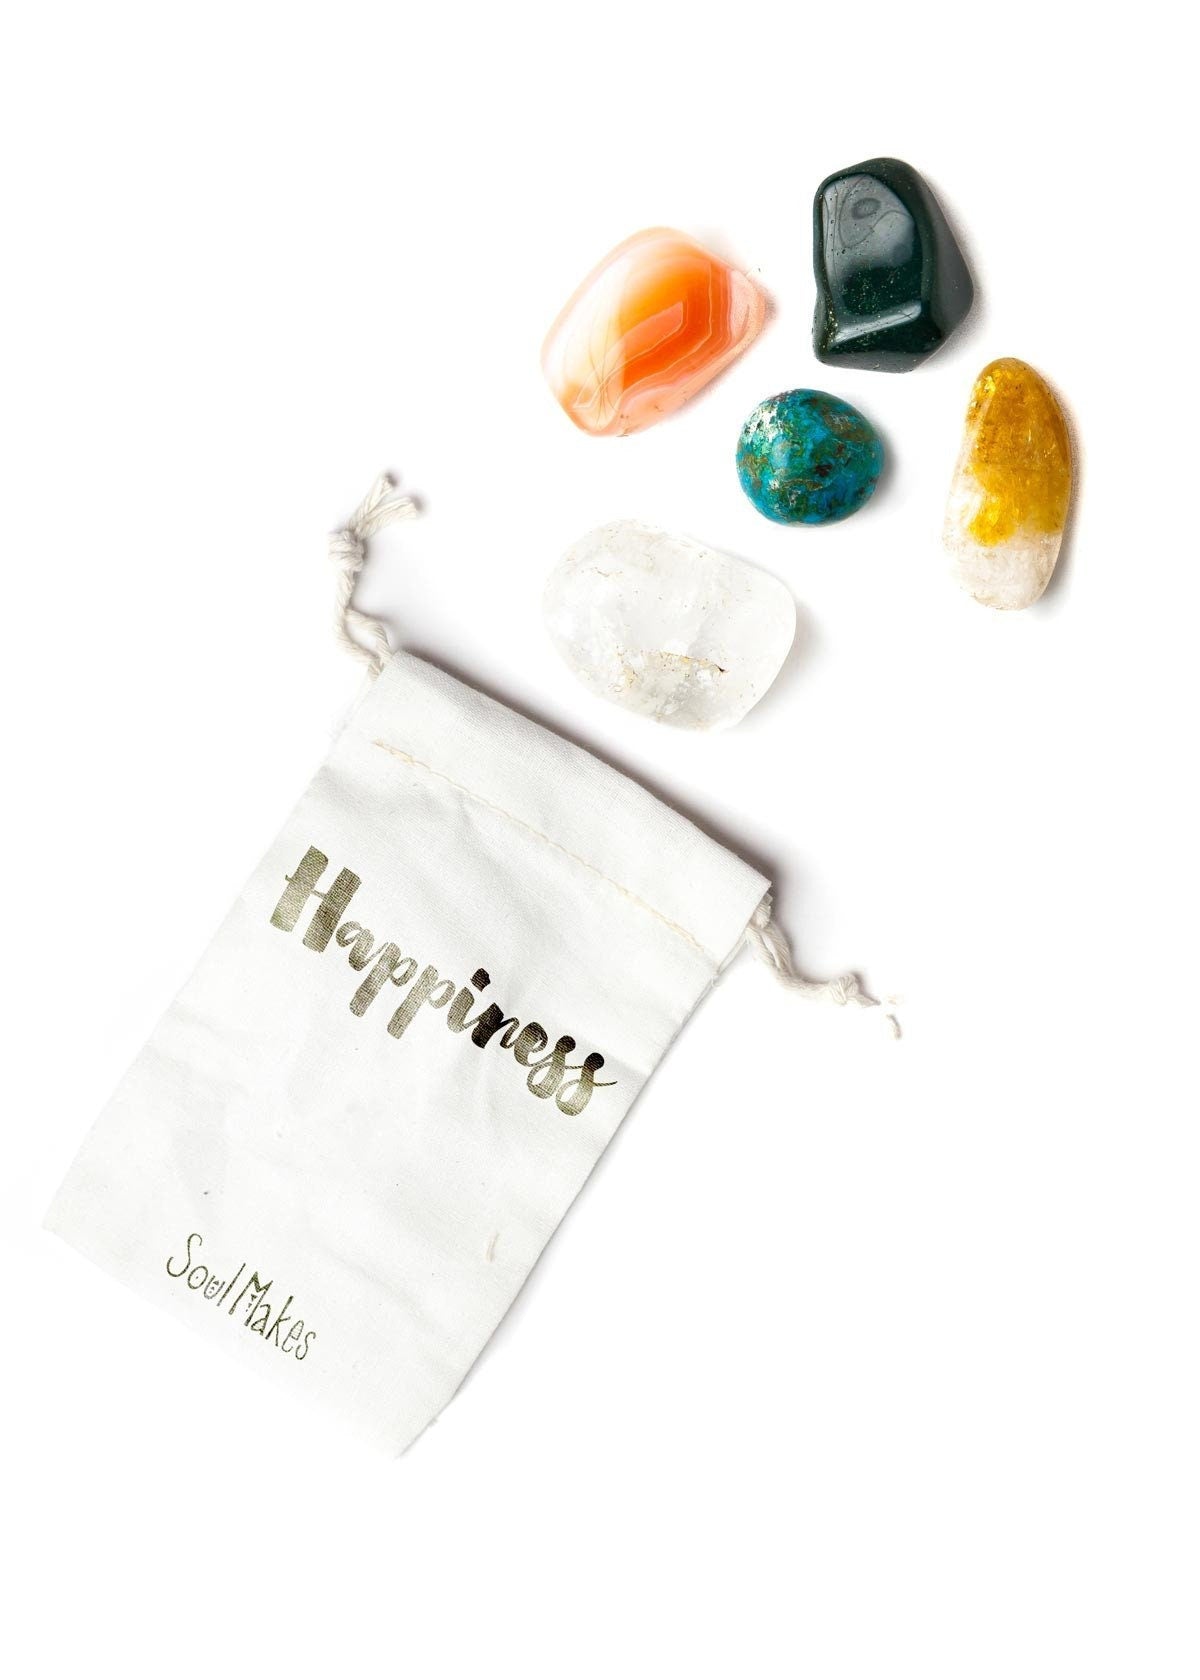 Don’t worry, be happy Happiness Crystal set Meditation Gift Pick me up gift